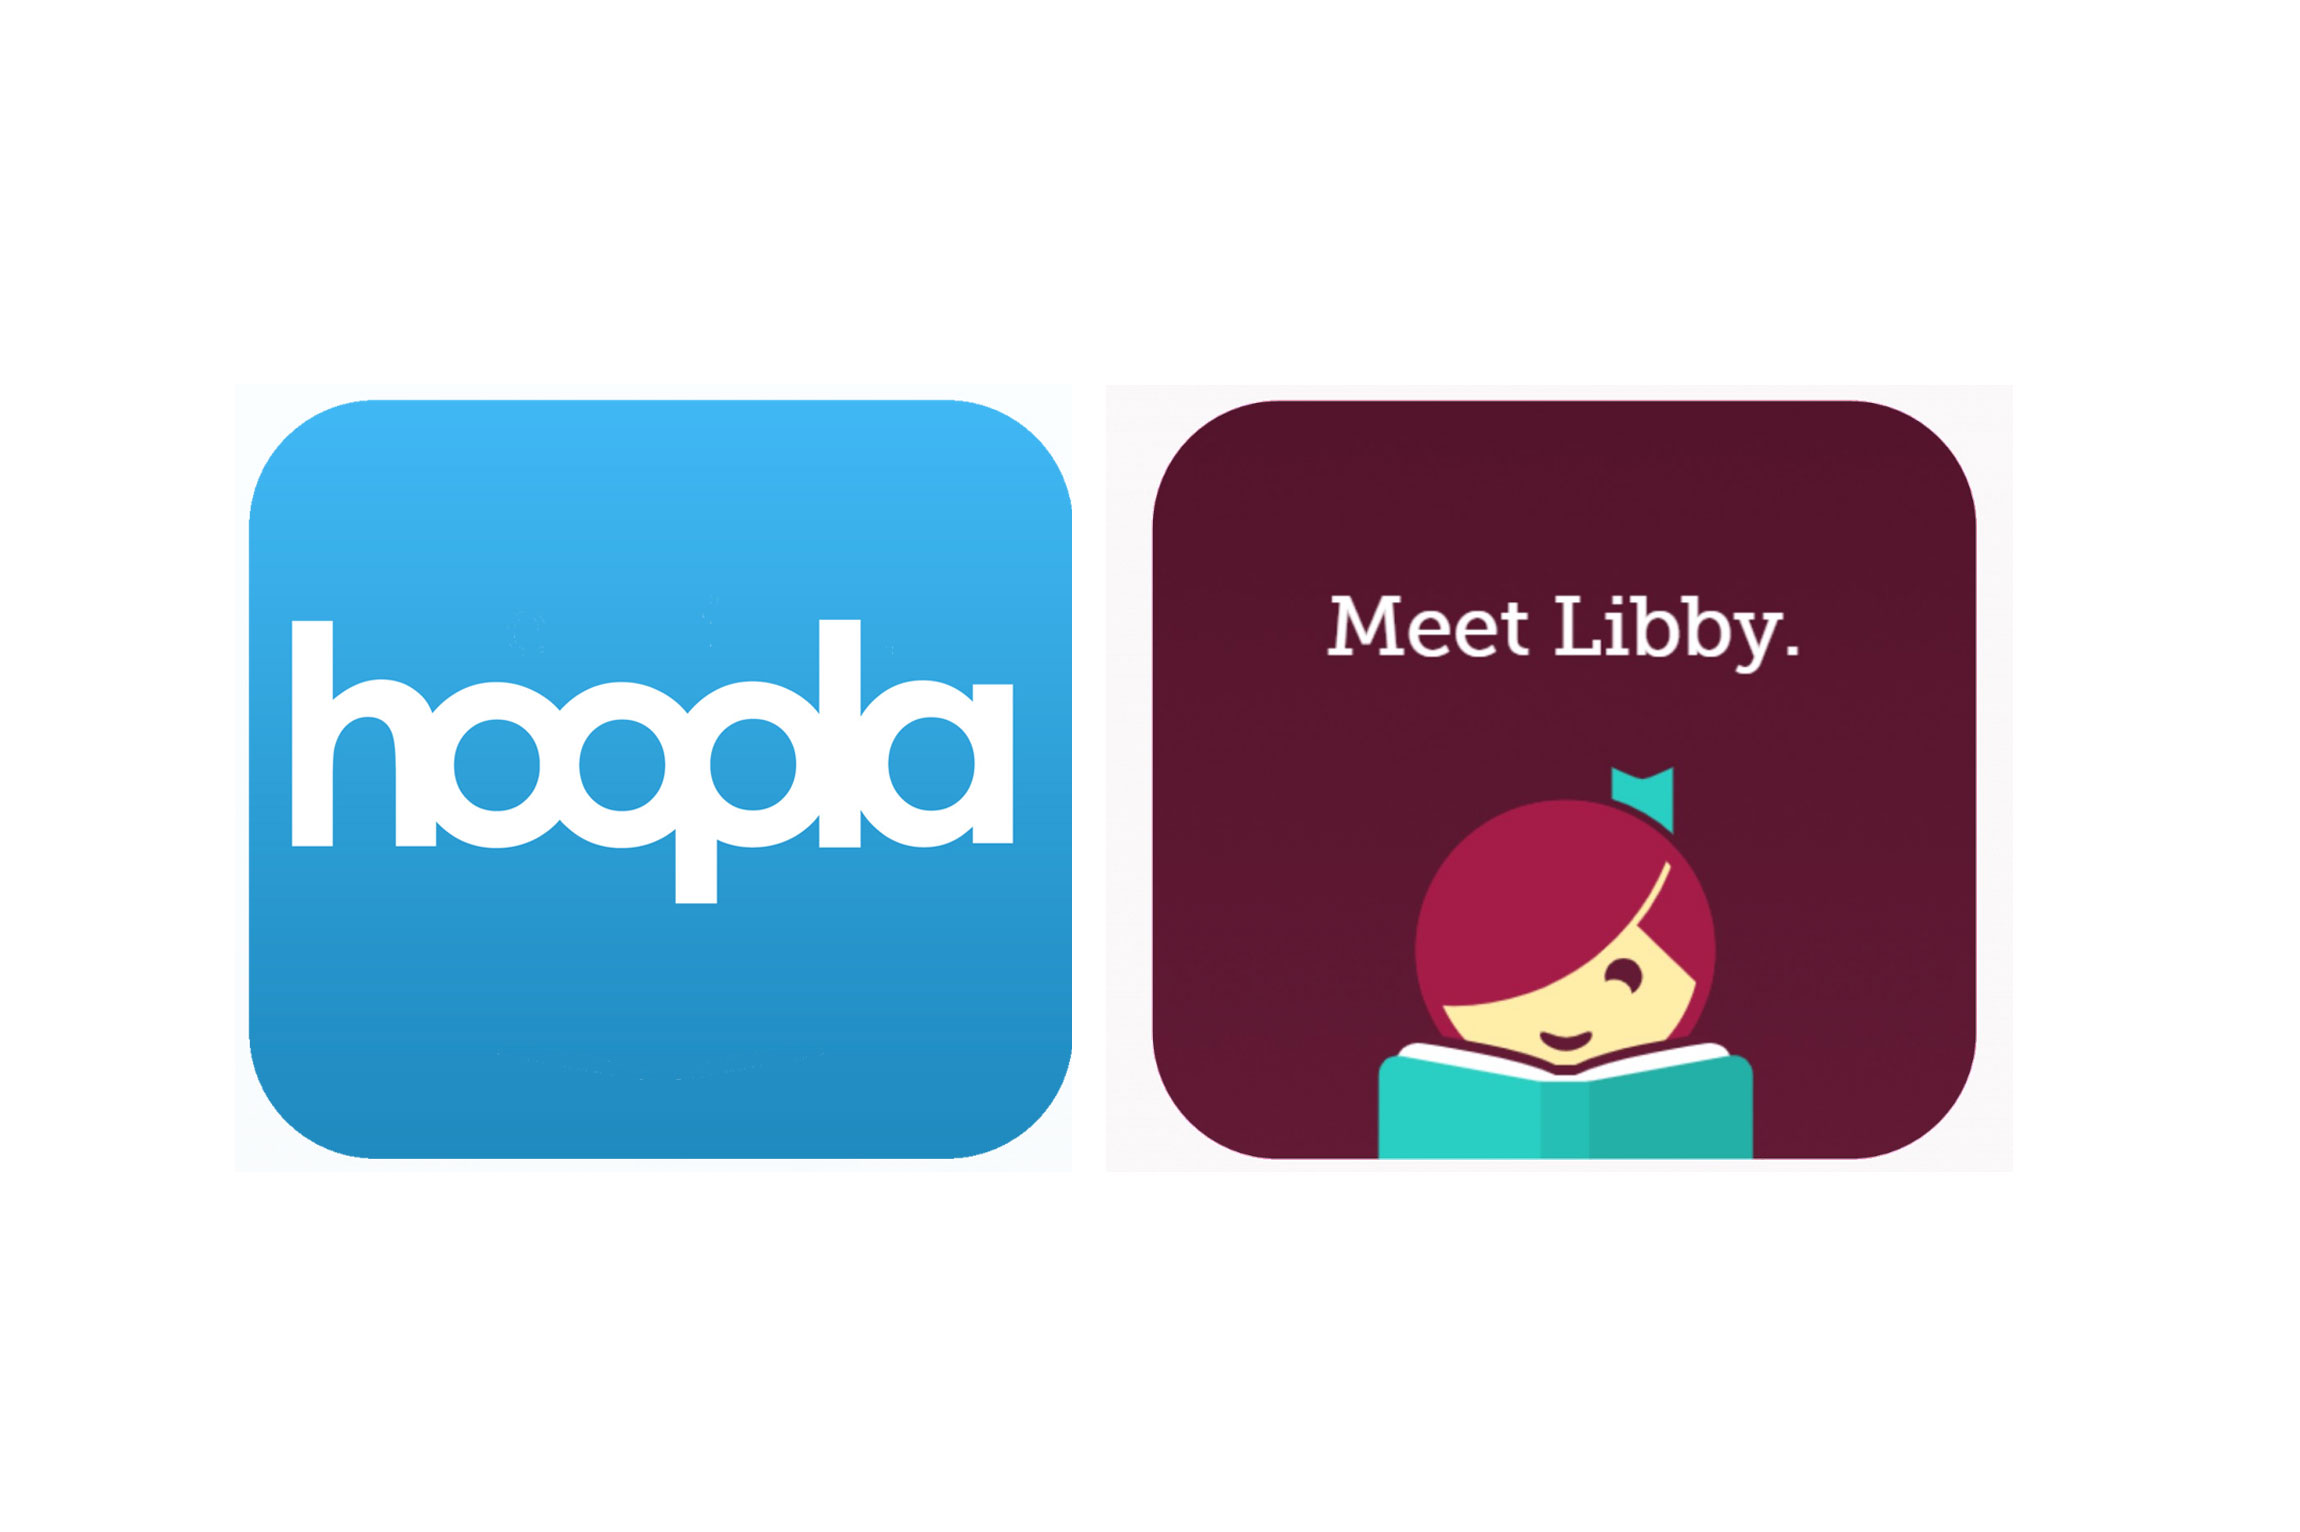 Libby and Hoopla apps for downloading eBooks